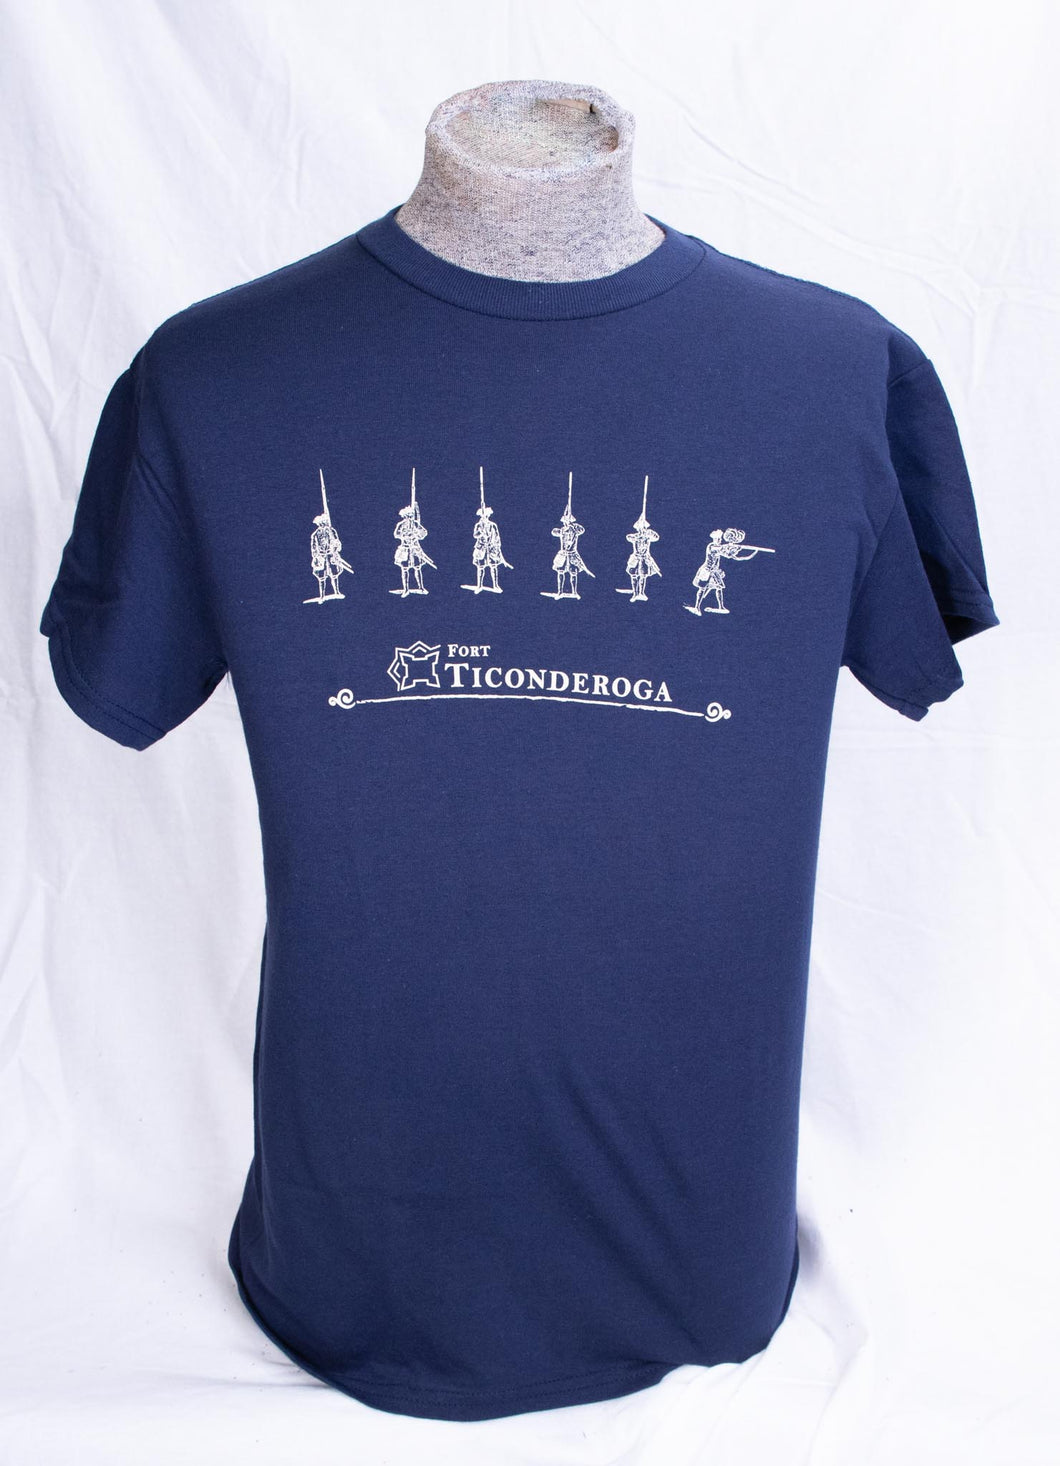 Fort Ticonderoga Manual of Arms T-Shirt